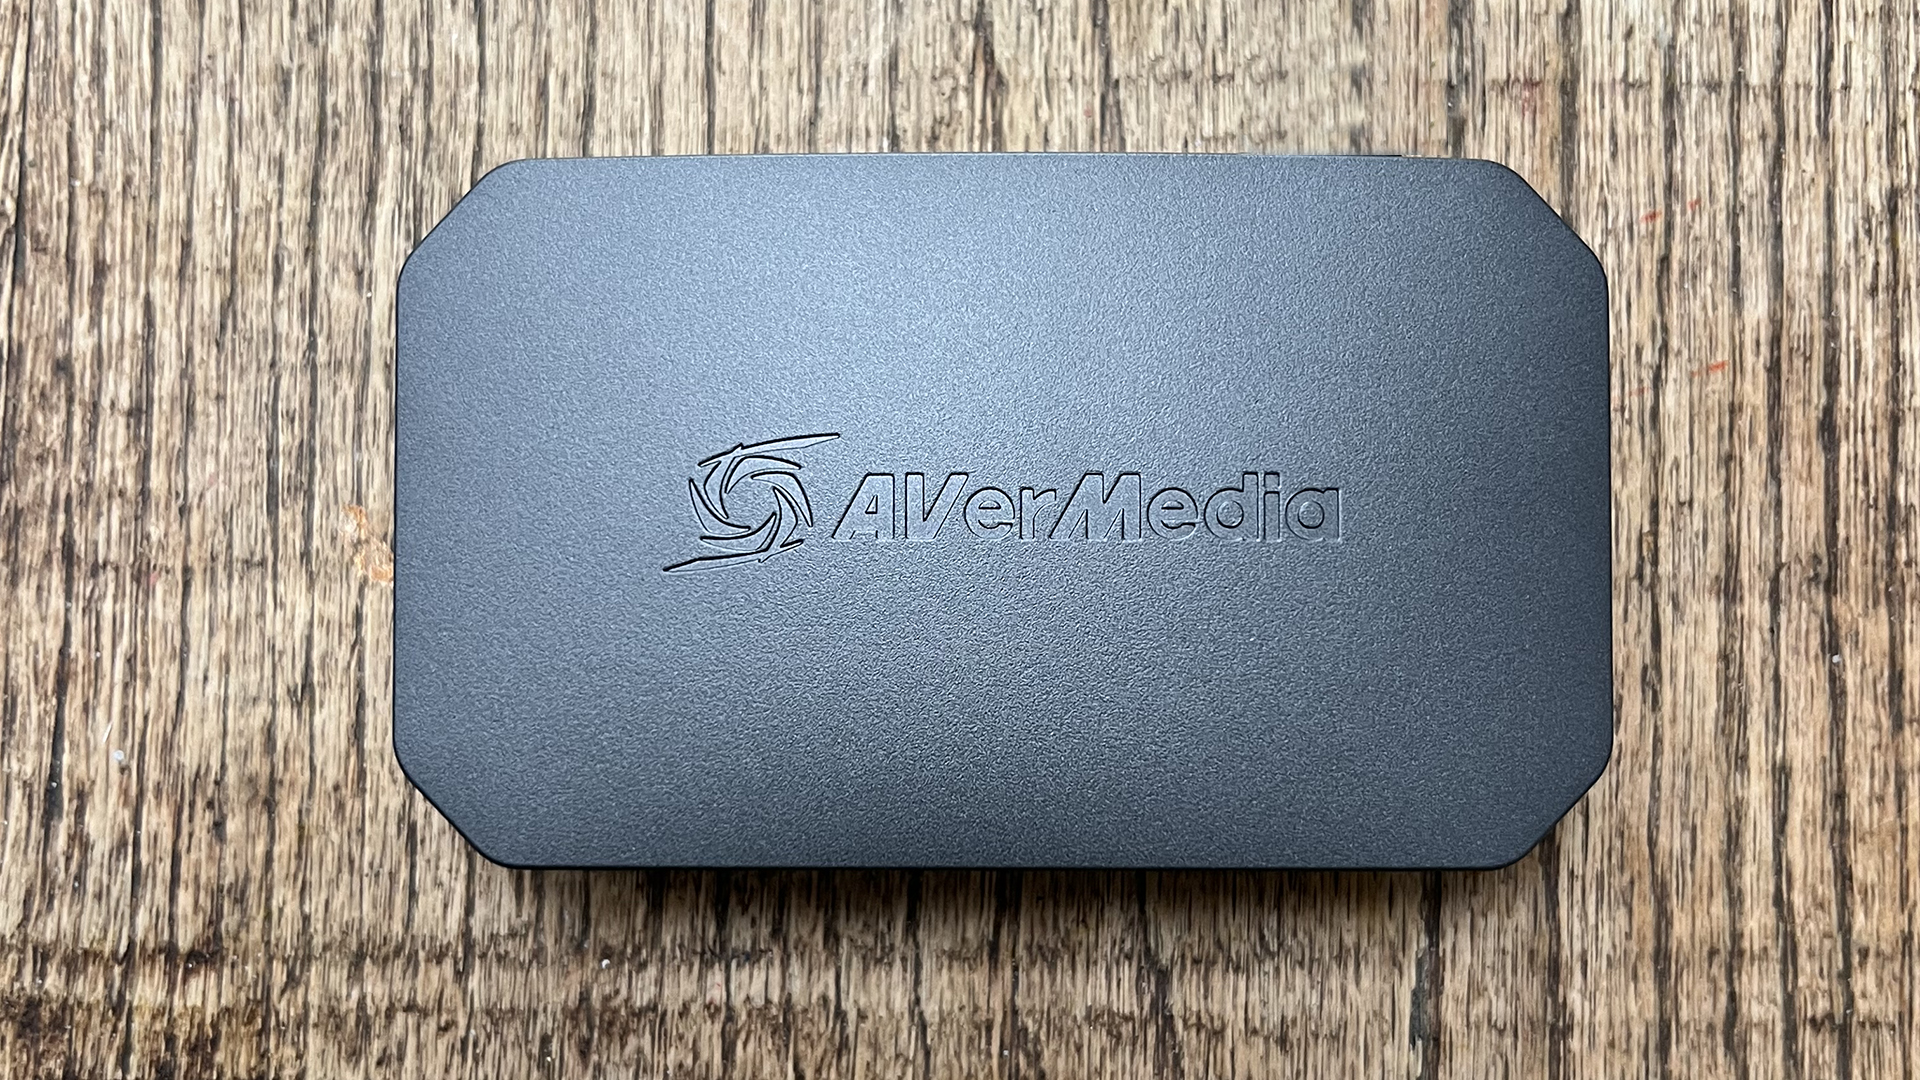 AVerMedia Live Gamer Ultra 2.1 review image showing the view of the product from above.